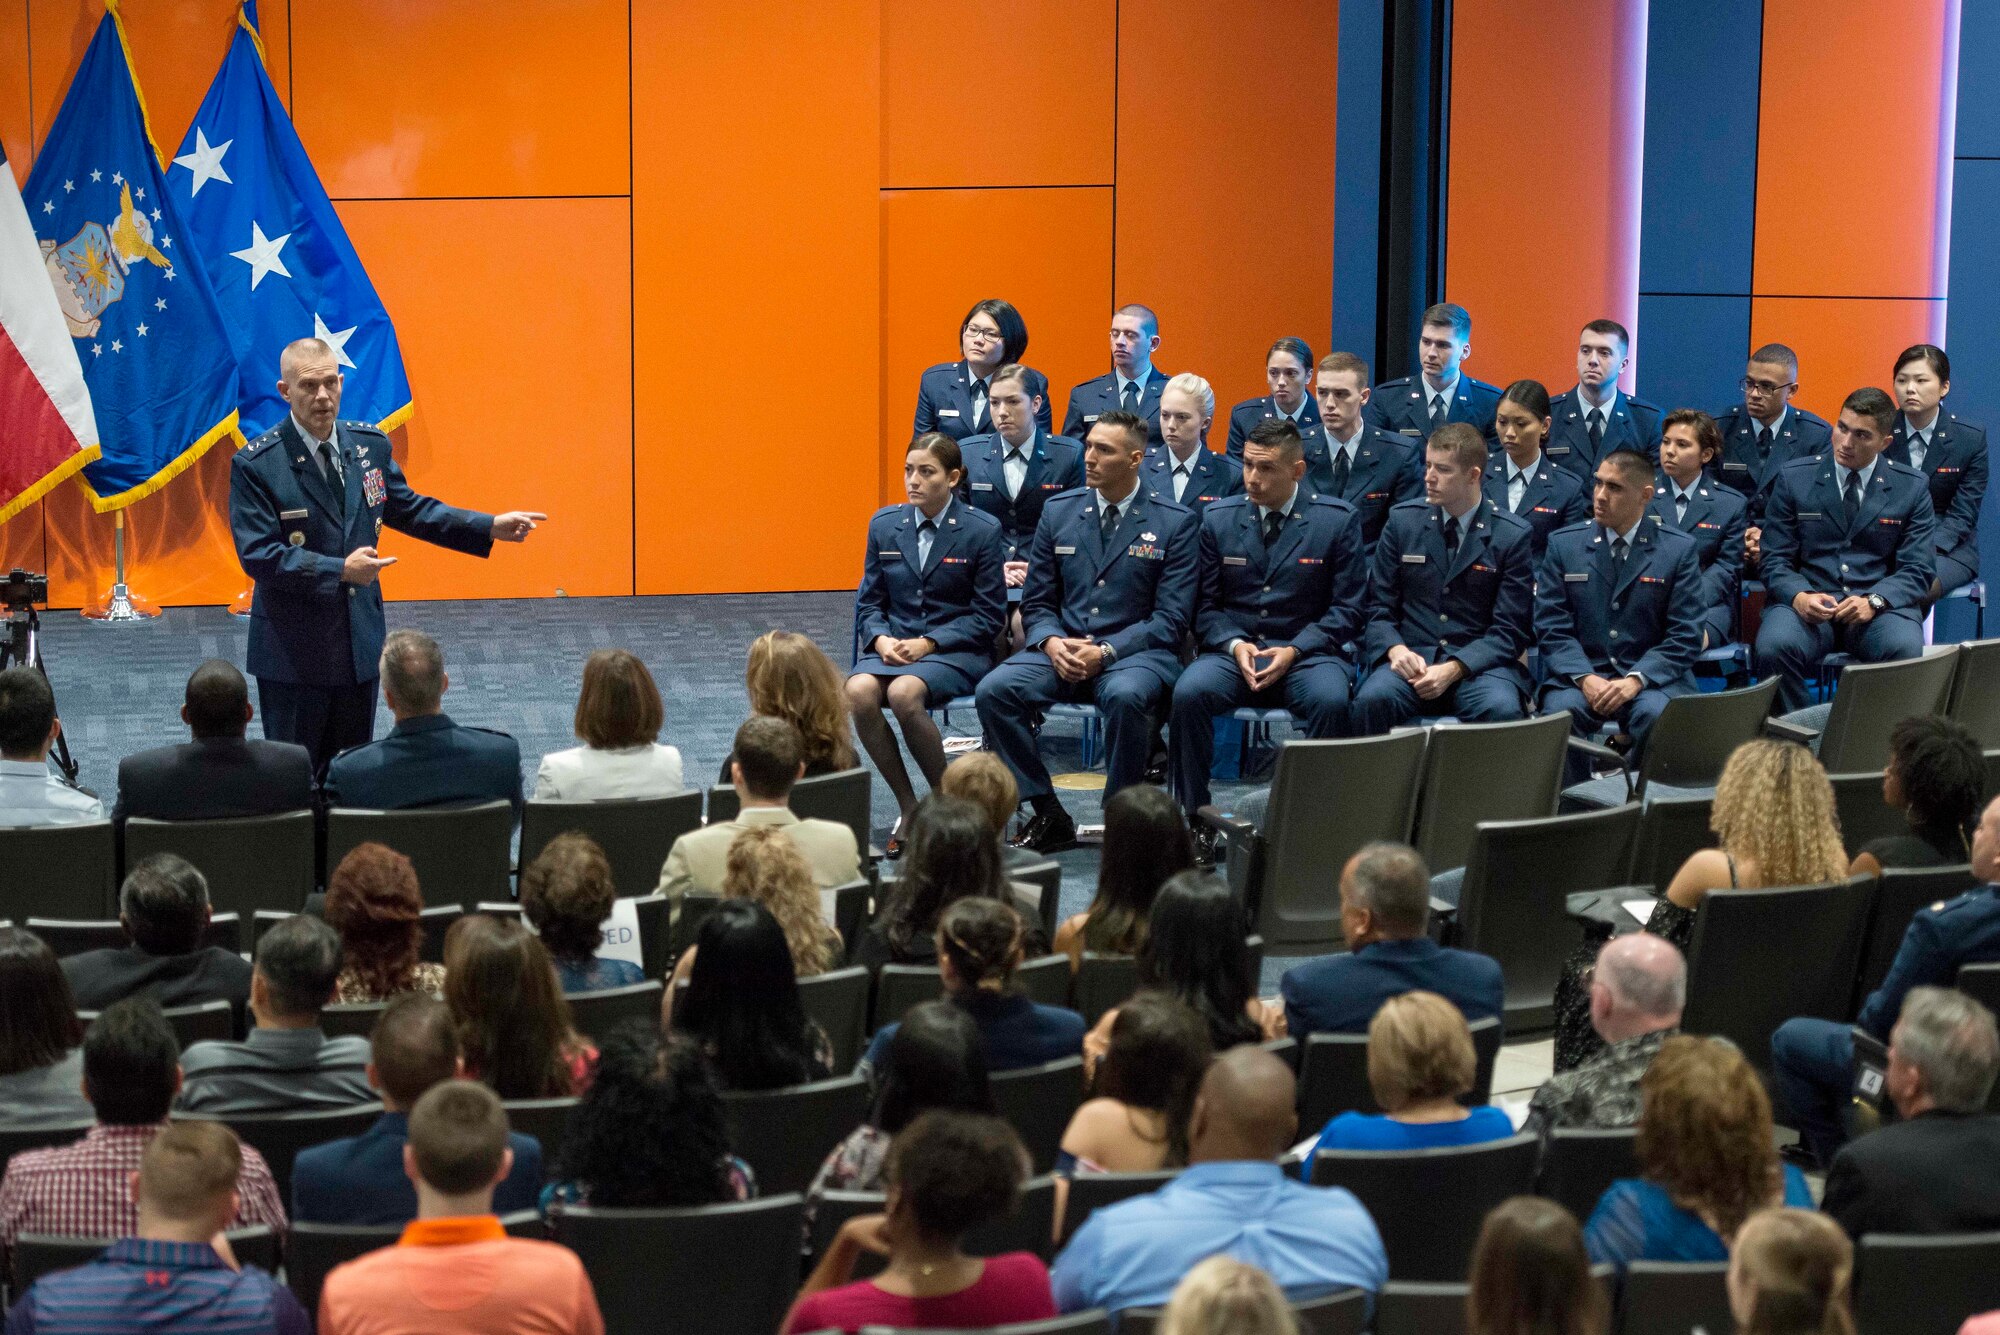 Lt. Gen. Steve Kwast, commander of Air Education and Training Command, speaks to family and friends of members of the Air Force Reserve Officer Training Corps Detachment 842 during their commissioning ceremony May 10, 2018, at the University of Texas San Antonio. Kwast is responsible for the recruiting, training and education of more than 293,000 Air Force members annually. (U.S. Air Force photo by Sean M. Worrell)